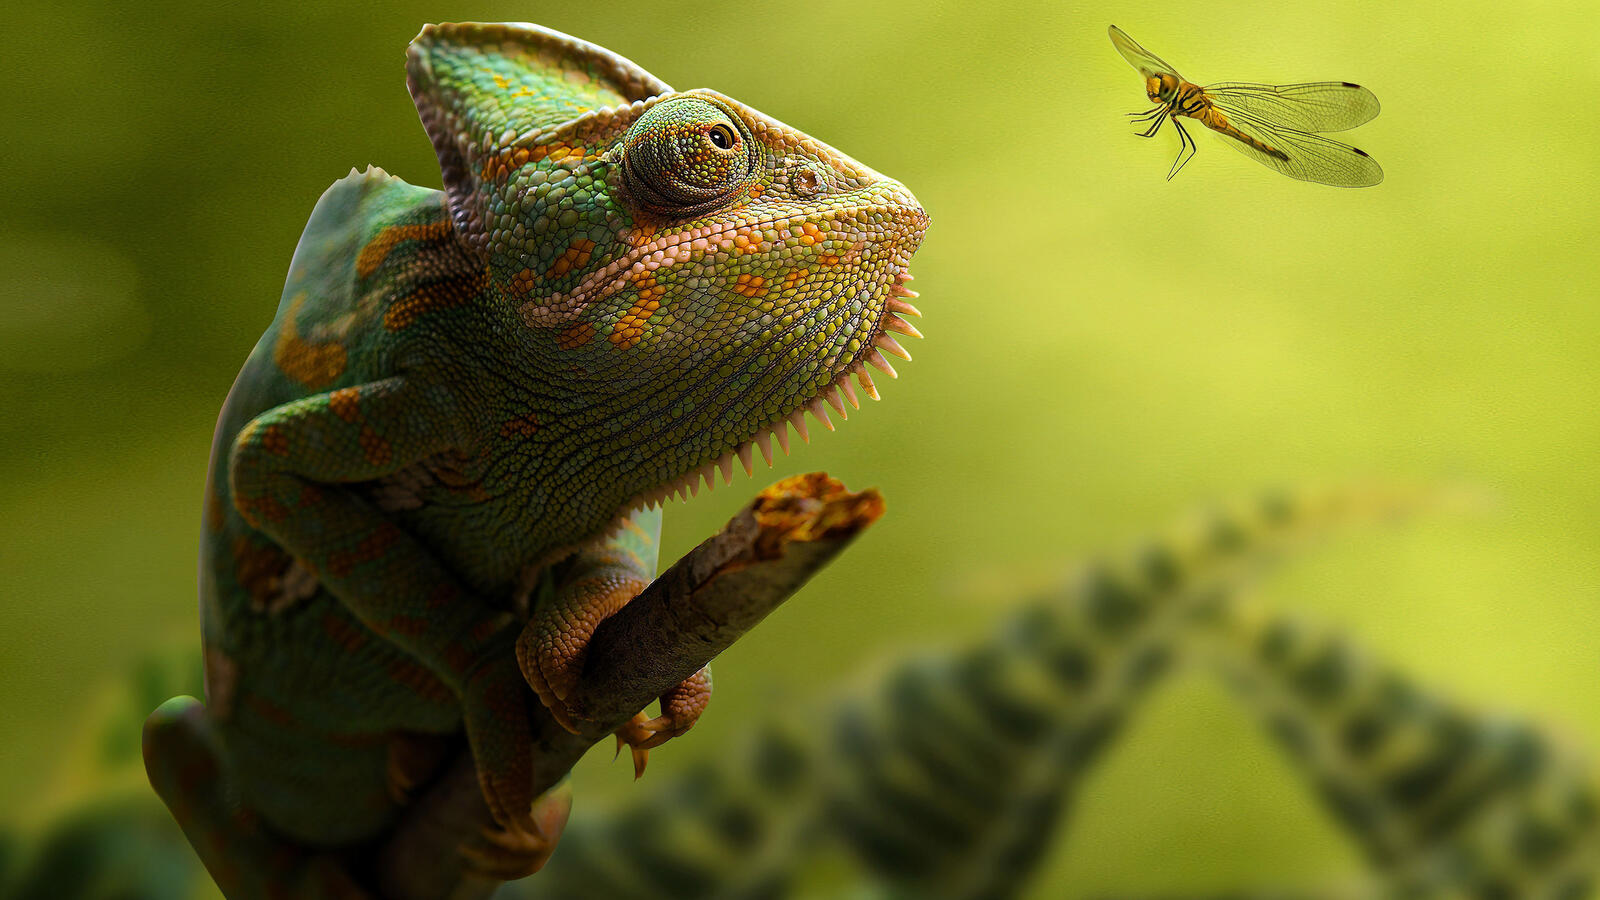 Free photo A green chameleon looks at a mosquito